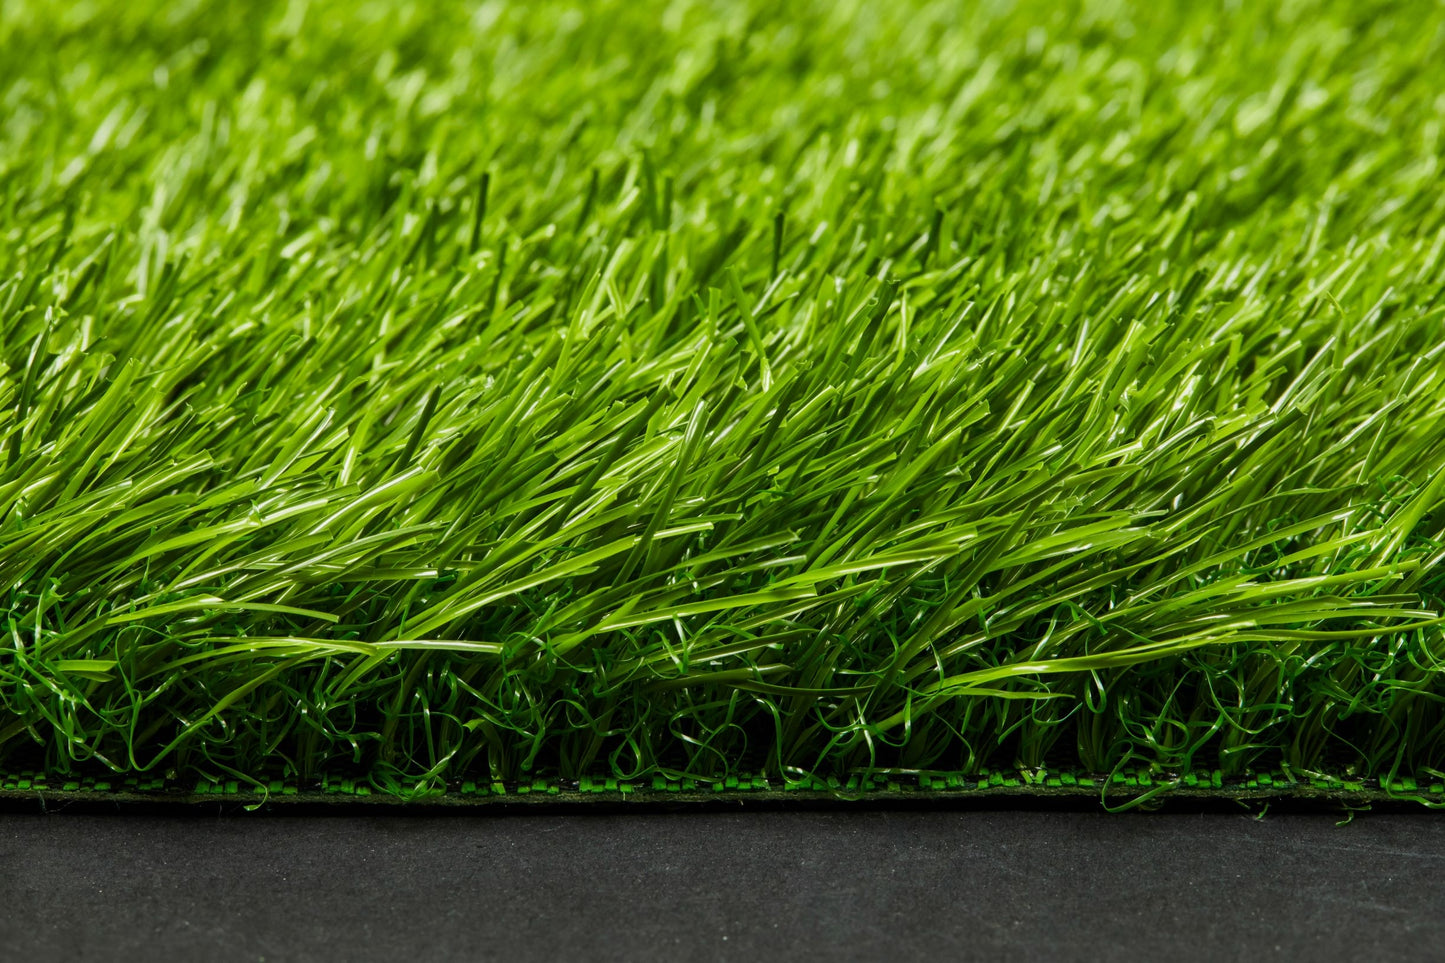 Artificial Grass 25mm 1x5m Synthetic Turf 5 SQM Fake Lawn Roll Green